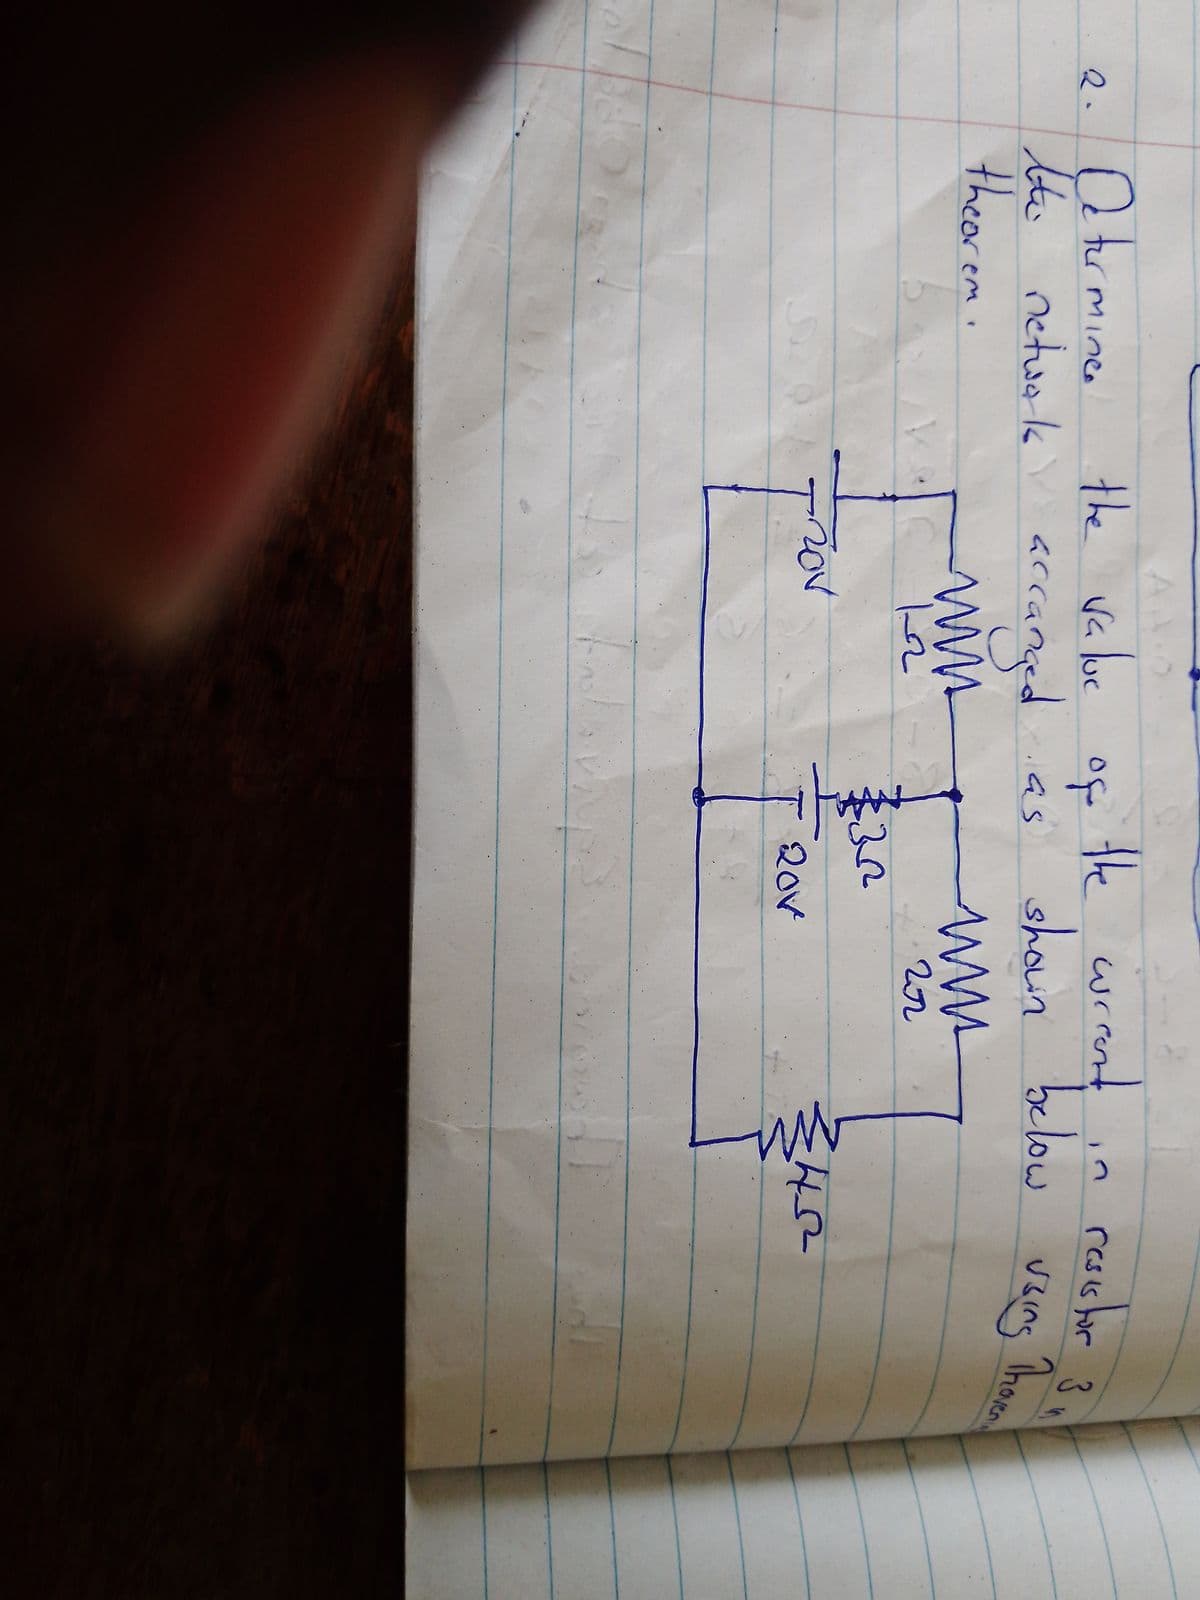 2. Determinee
the network accanged
theorem.
www.
12
pak
A
the value
of
accanged as
S
-20V
the current
32
Followays
www
202
20v
C
shown below using I
resistor
ZH-S²
3
Thoven